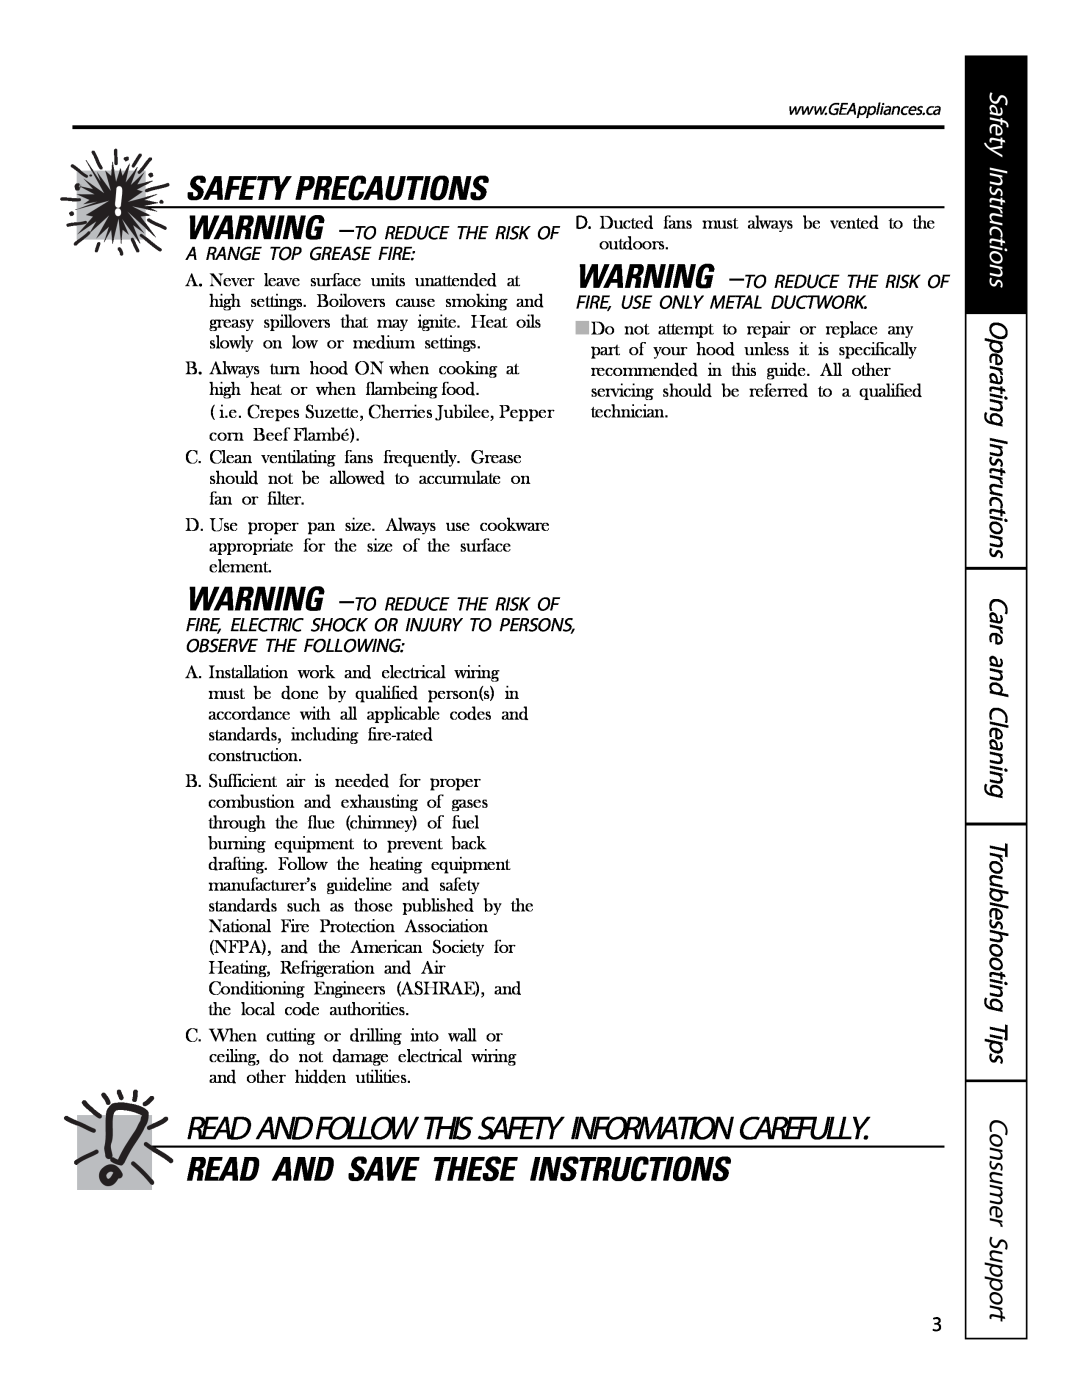 GE PVIG940, PVWT936 Safety Precautions, Read And Save These Instructions, Readandfollowthissafetyinformationcarefully 